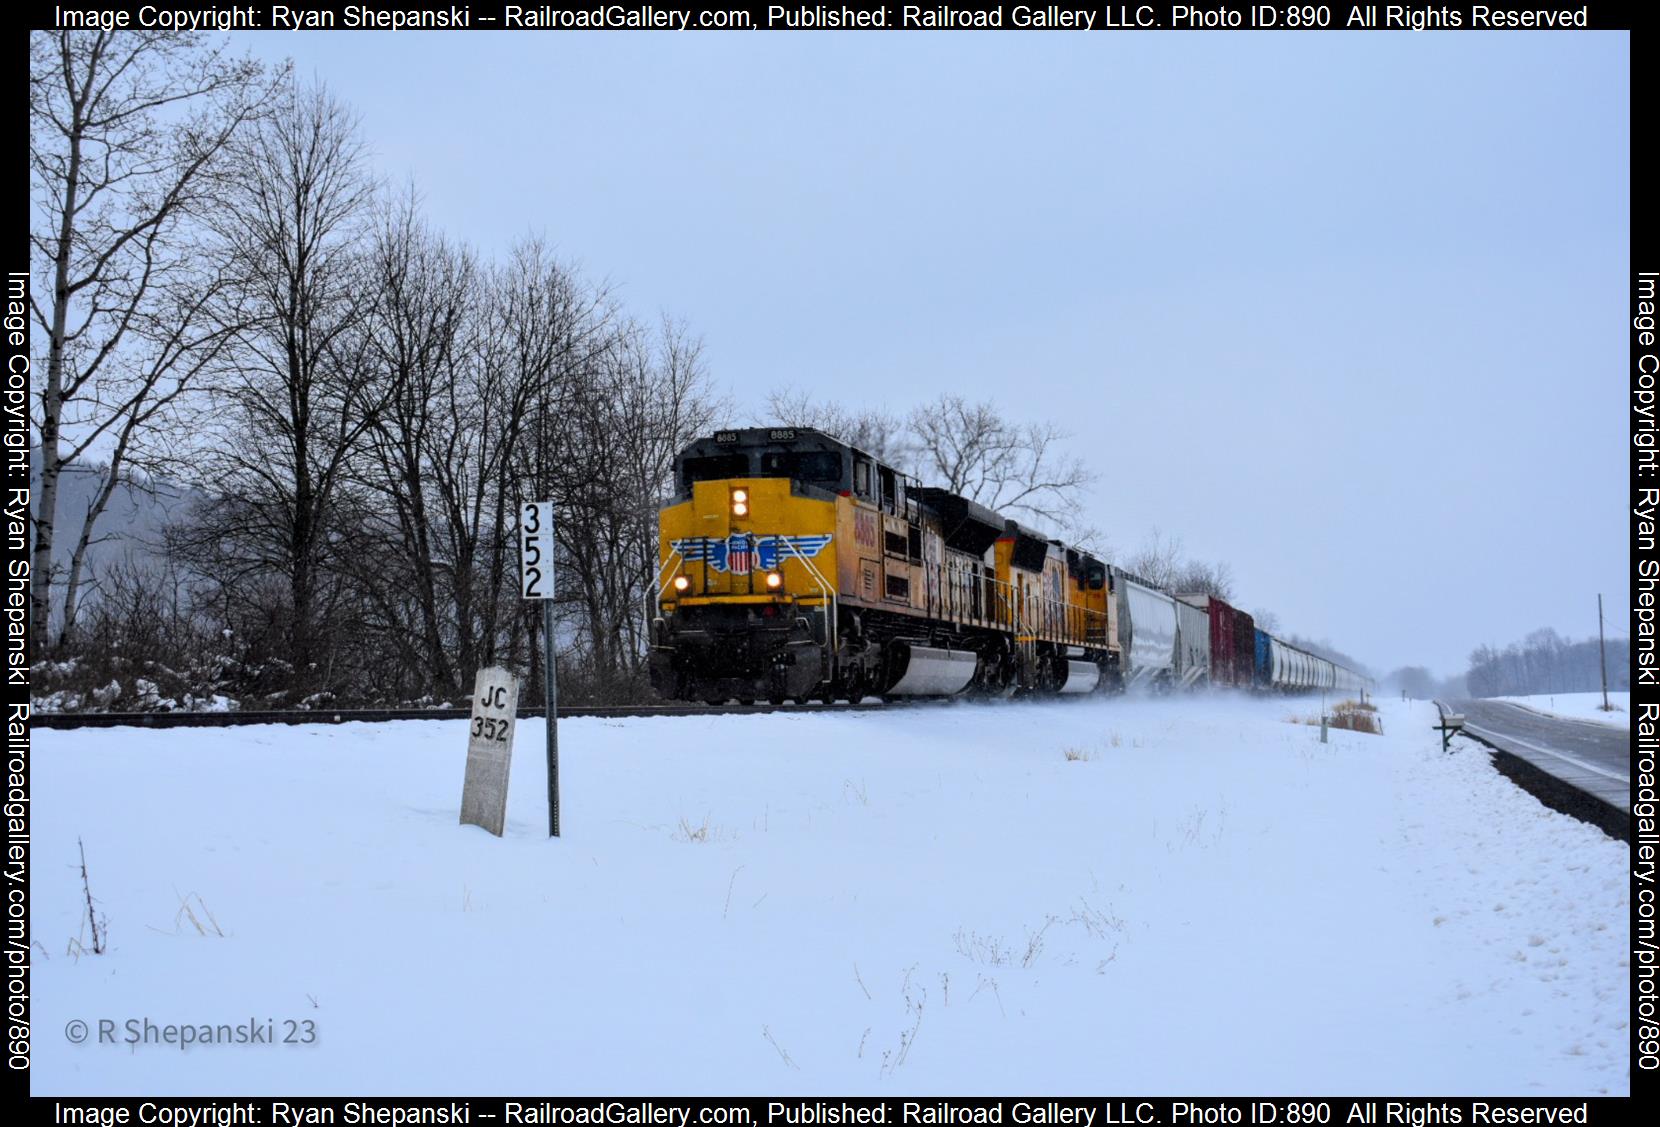 UP 8885 is a class SD70AH and  is pictured in Swain, NY, United States.  This was taken along the Southern tier on the Union Pacific Railroad. Photo Copyright: Ryan Shepanski uploaded to Railroad Gallery on 03/27/2023. This photograph of UP 8885 was taken on Monday, March 13, 2023. All Rights Reserved. 